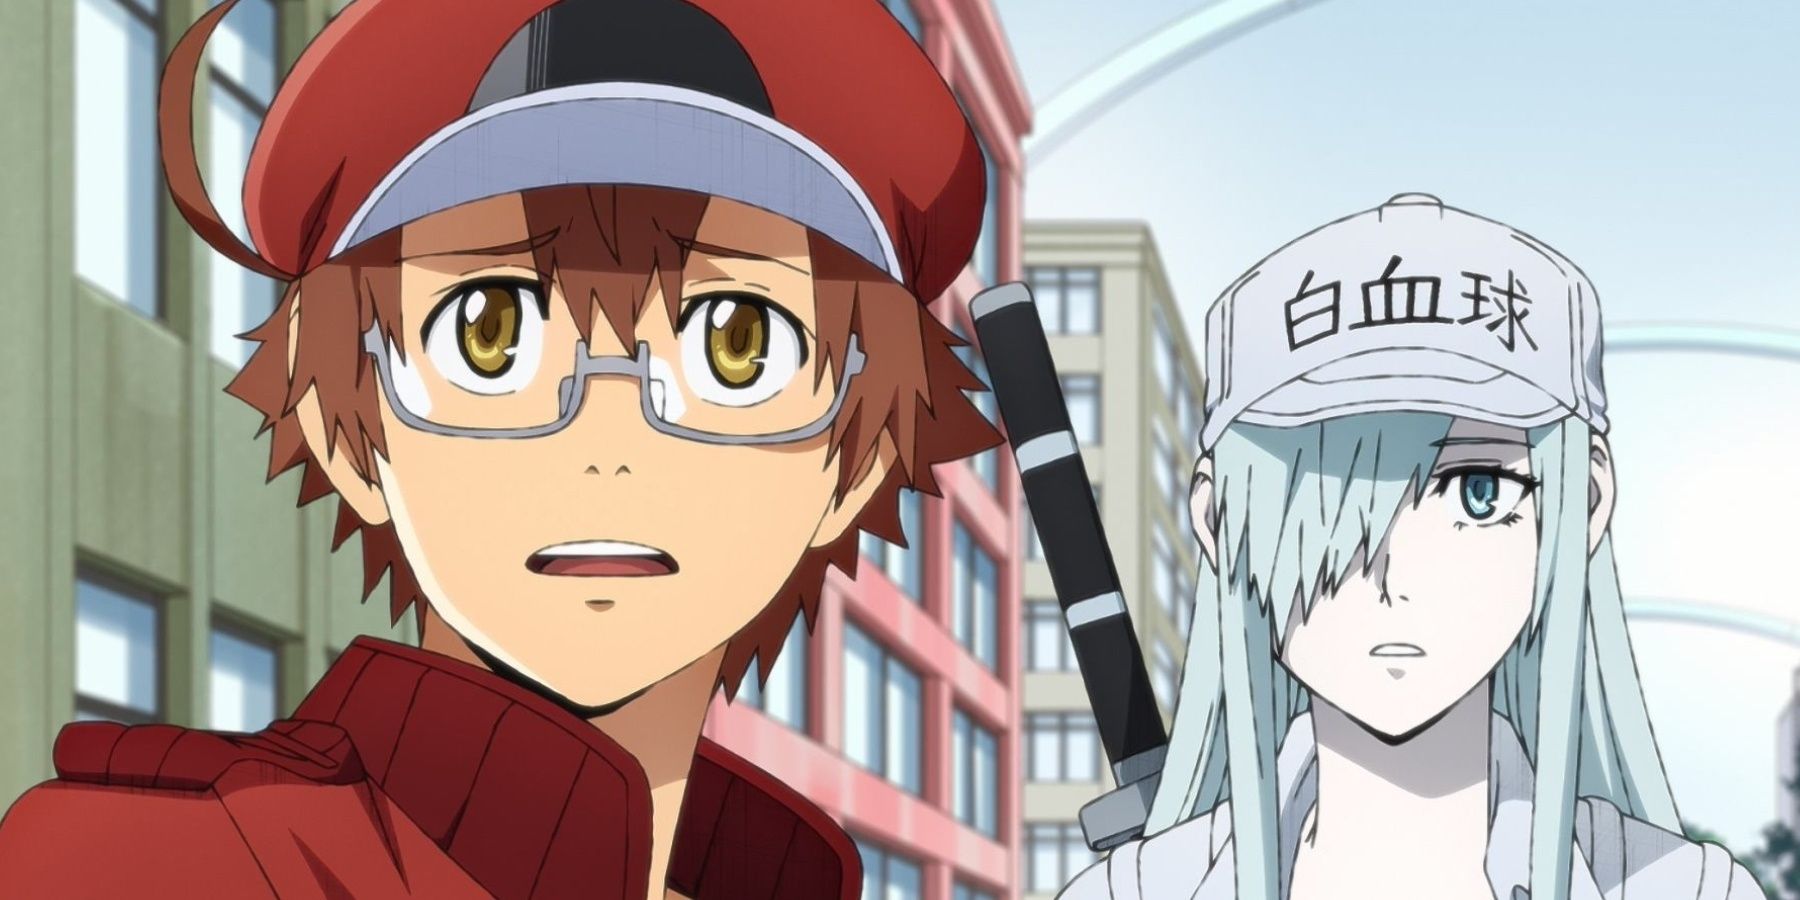 Cells at Work! Code Black anime